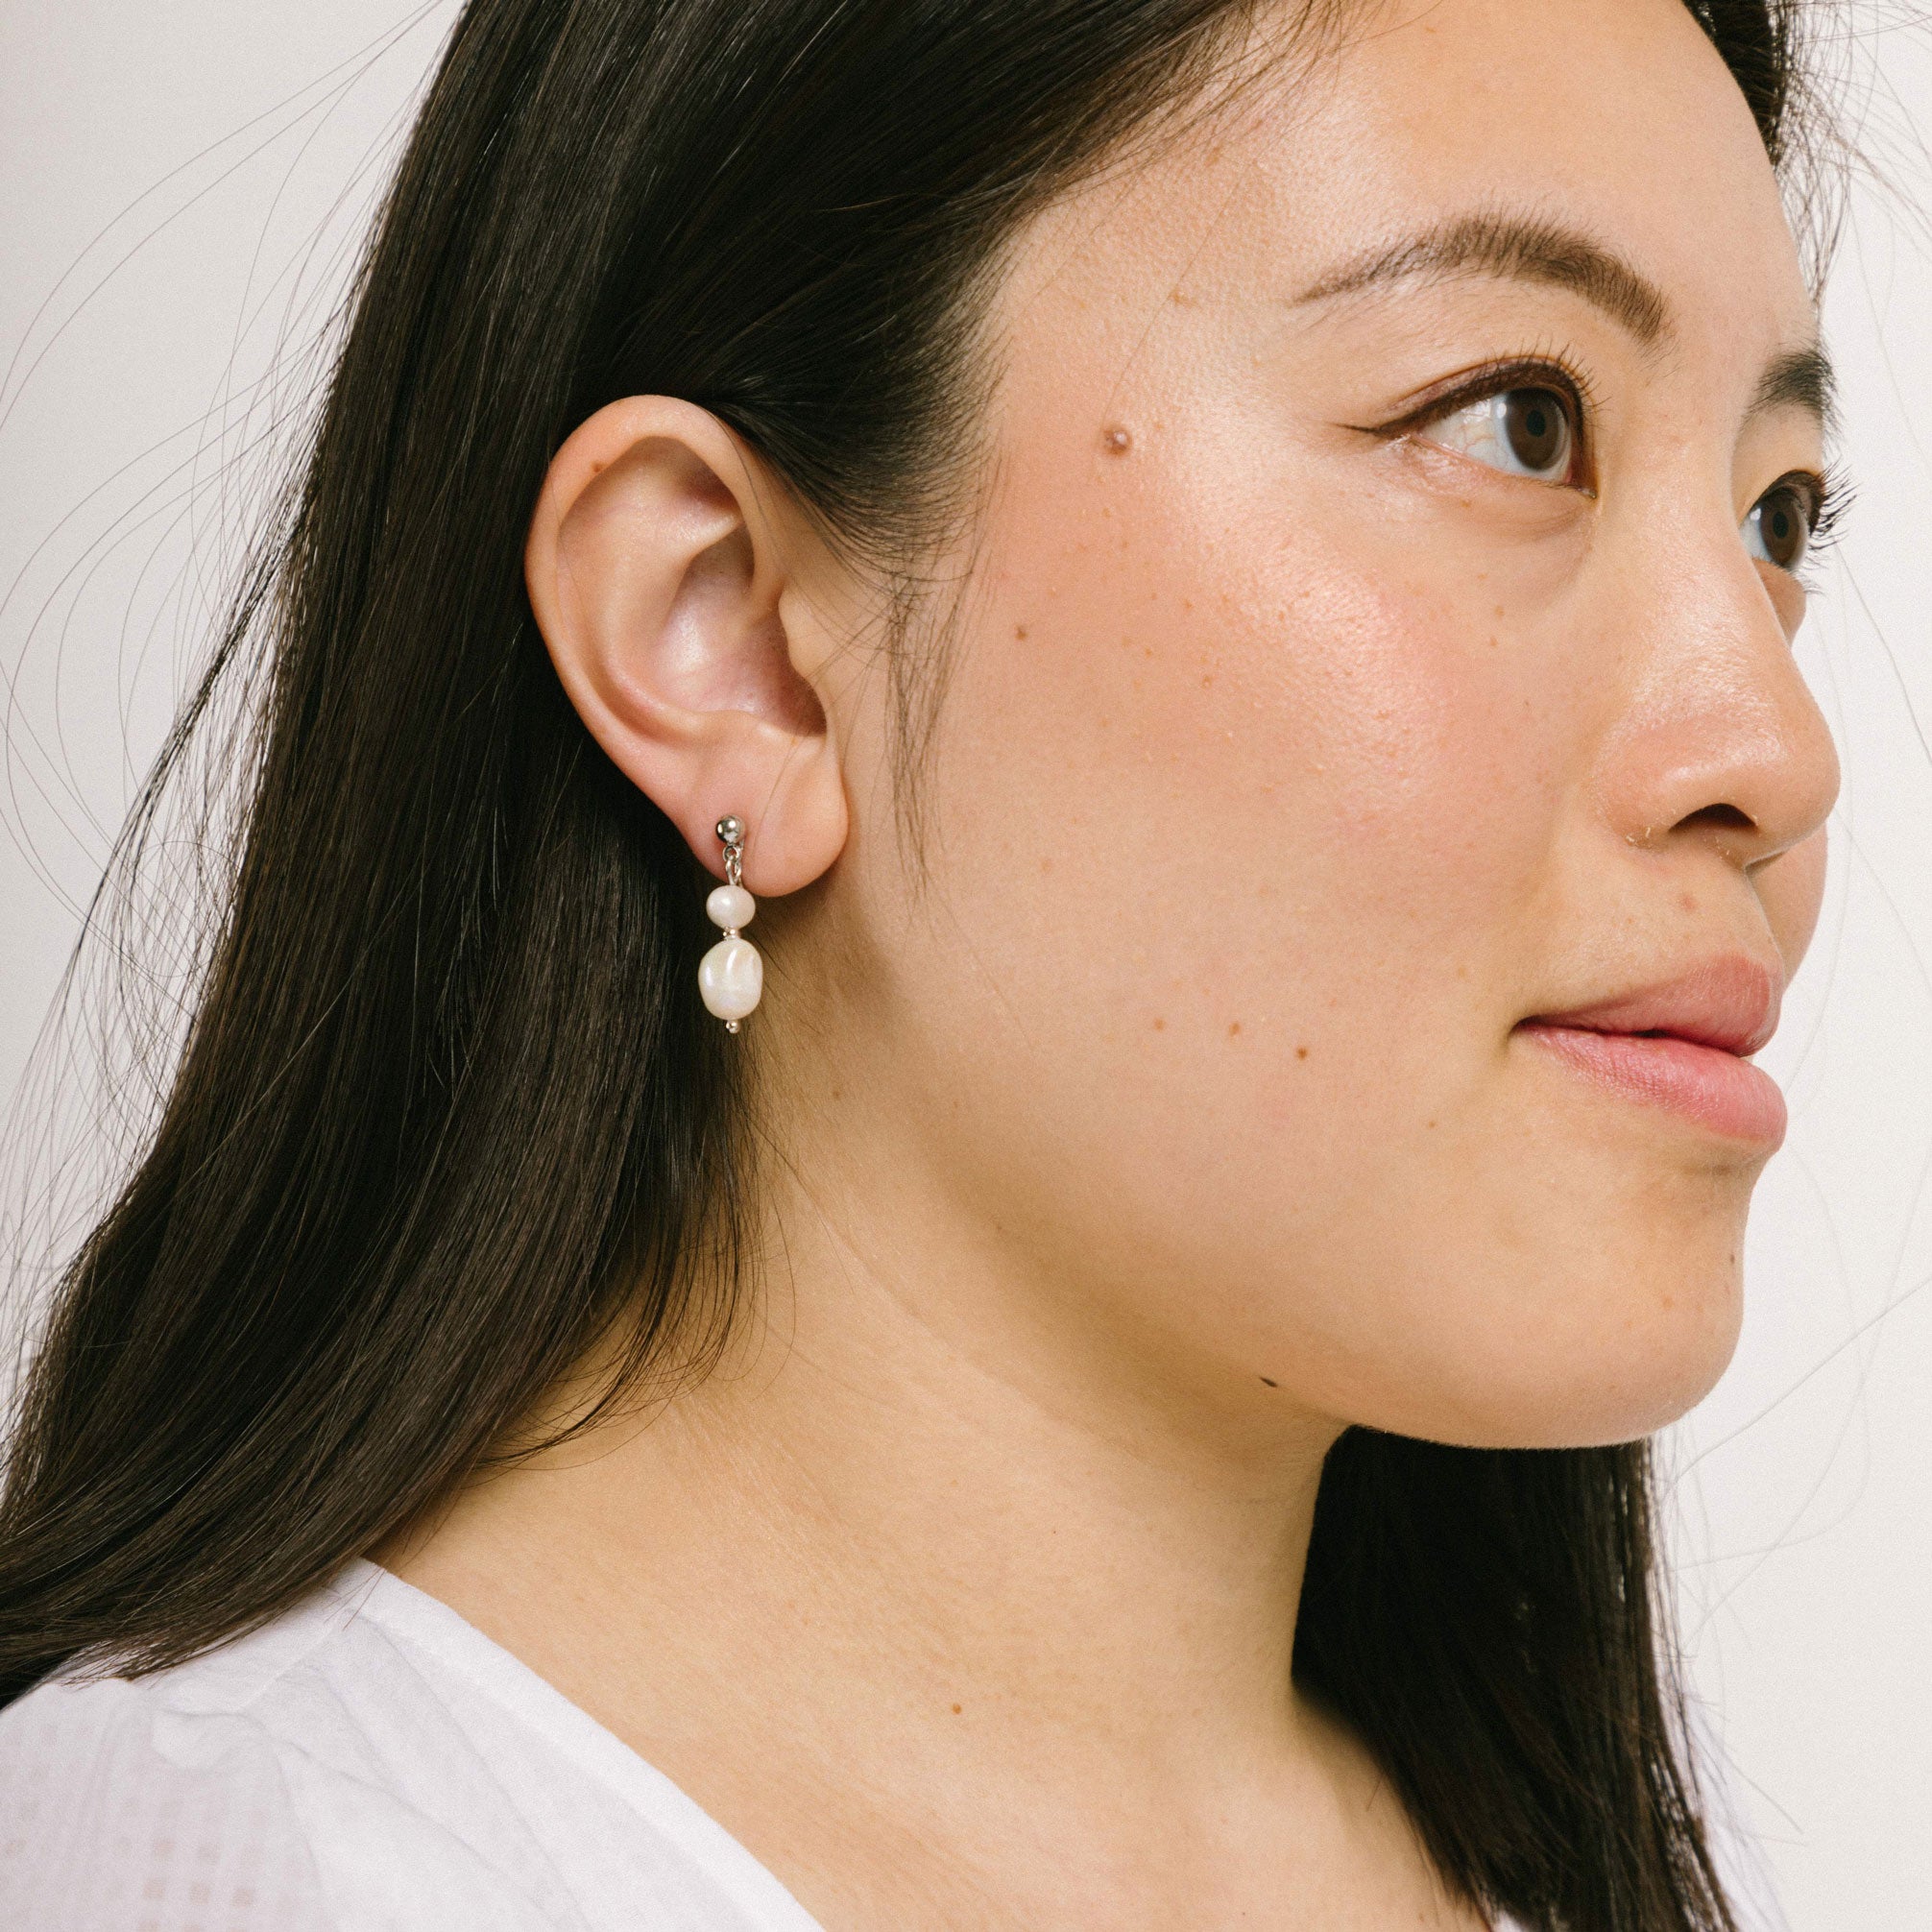 A model wearing the Silver Plated Brass Duo Pearl Clip-On Earrings features a mosquito coil clip-on design, making it ideal for all ear types including those with thick/large, sensitive, small/thin, and stretched/healing ears. These earrings comfortably allow for up to 24 hours of wear and have a medium secure hold with adjustable padding. The freshwater pearls used in these earrings may vary slightly in size and colour.